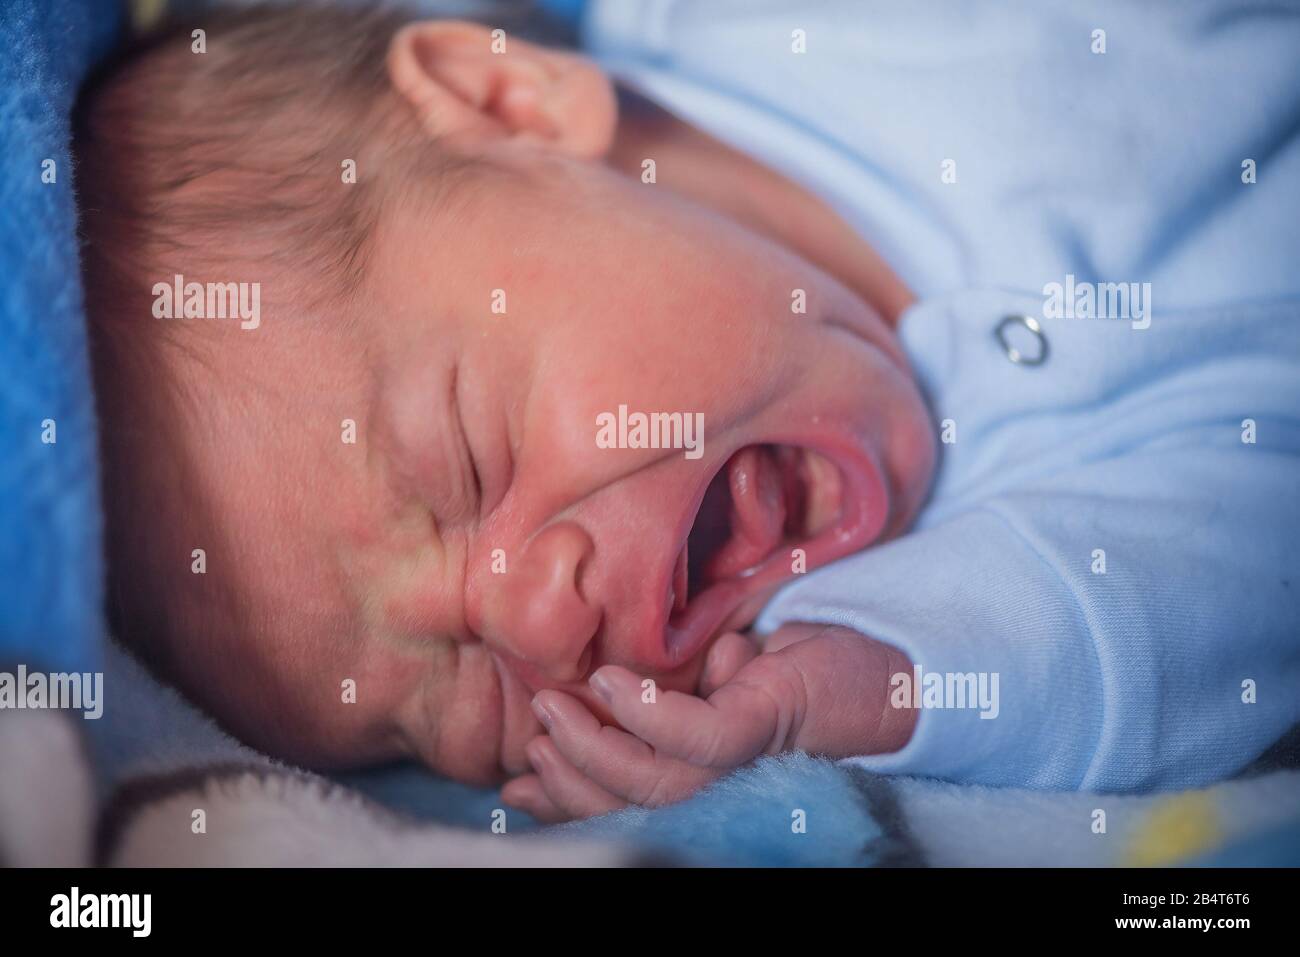 Close up portrait of a newborn baby boy crying in the bed Stock Photo